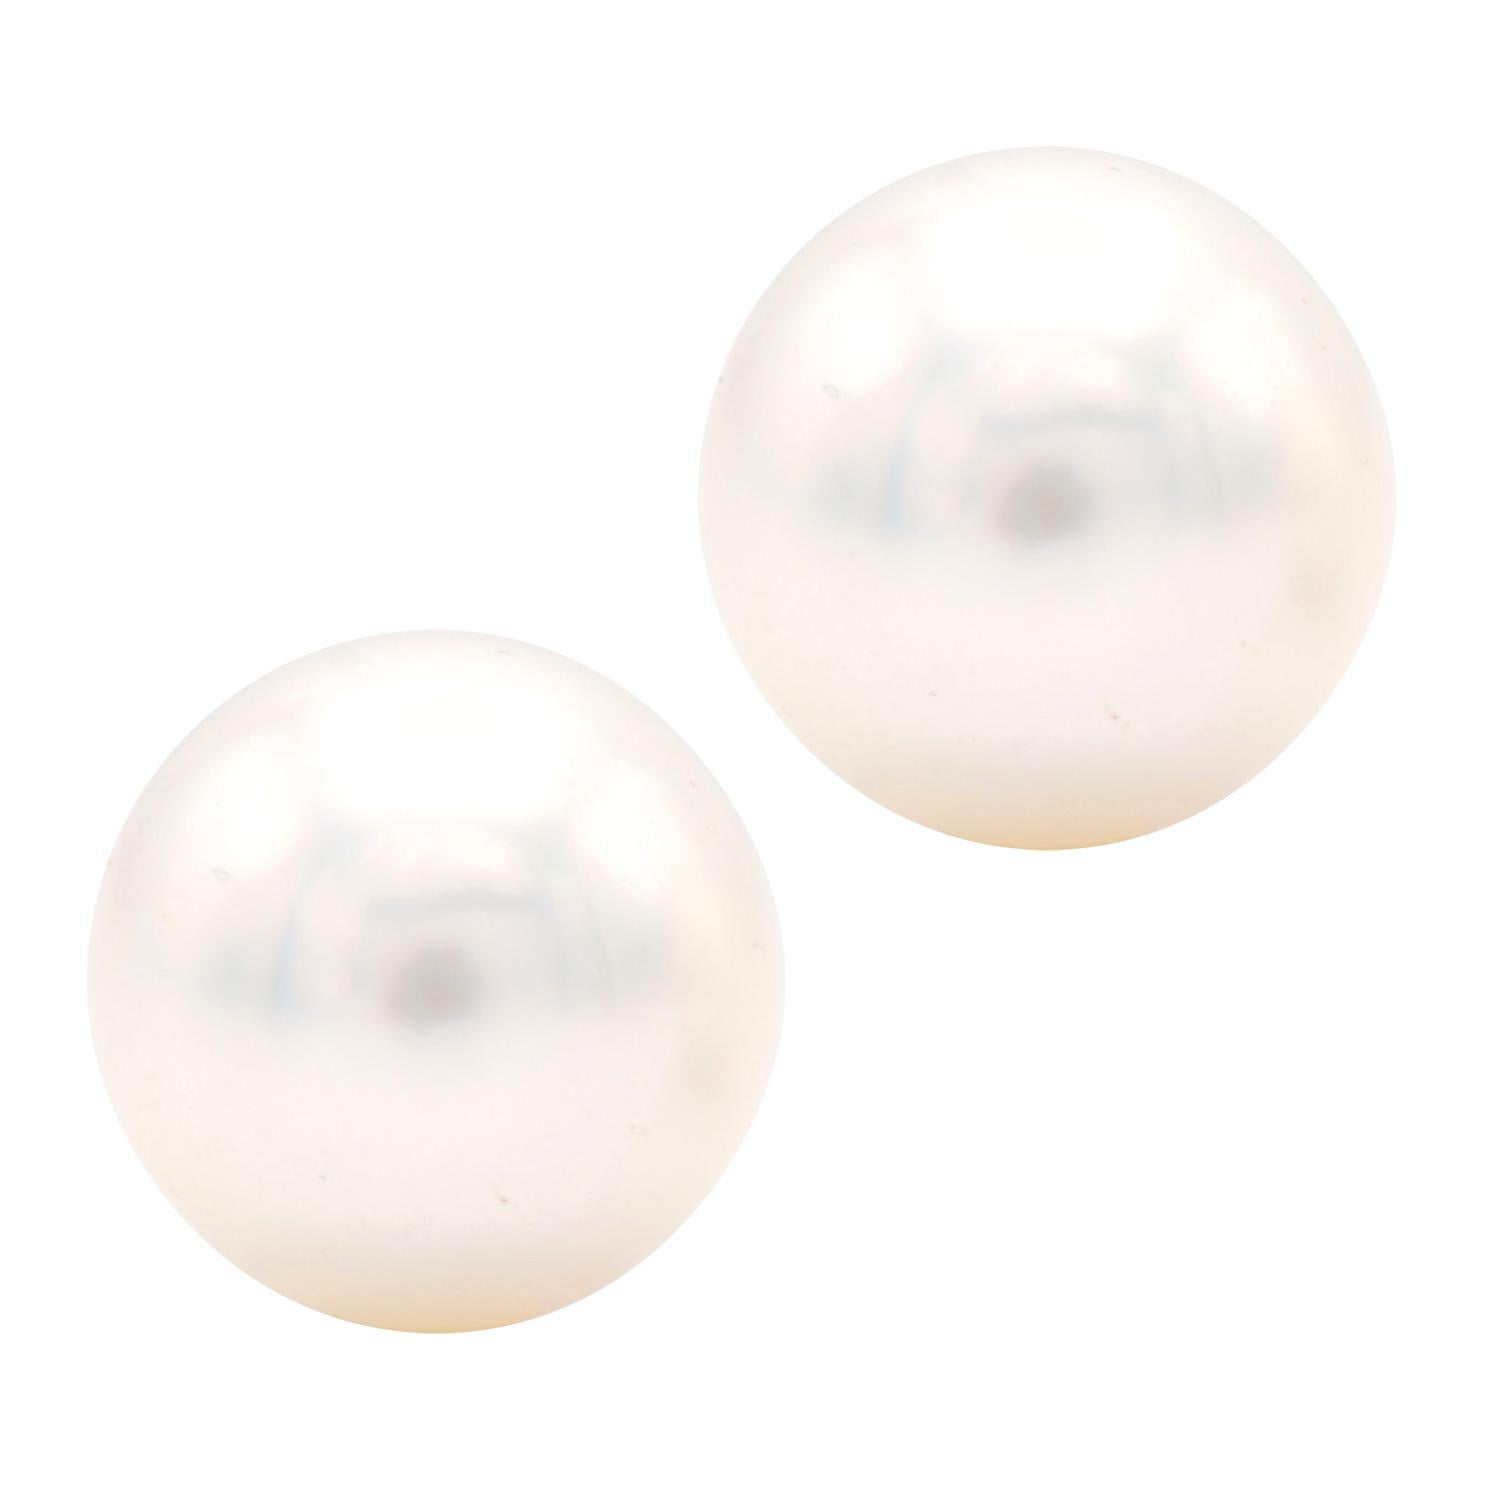 Cultured pearl stud earrings are the most classic and timeless piece of jewelry. They can be worn by anyone and everyone and make an excellent gift for all occasions. These 8-8.5mm cultured pearl earrings are perfectly matched and set in 14 karat